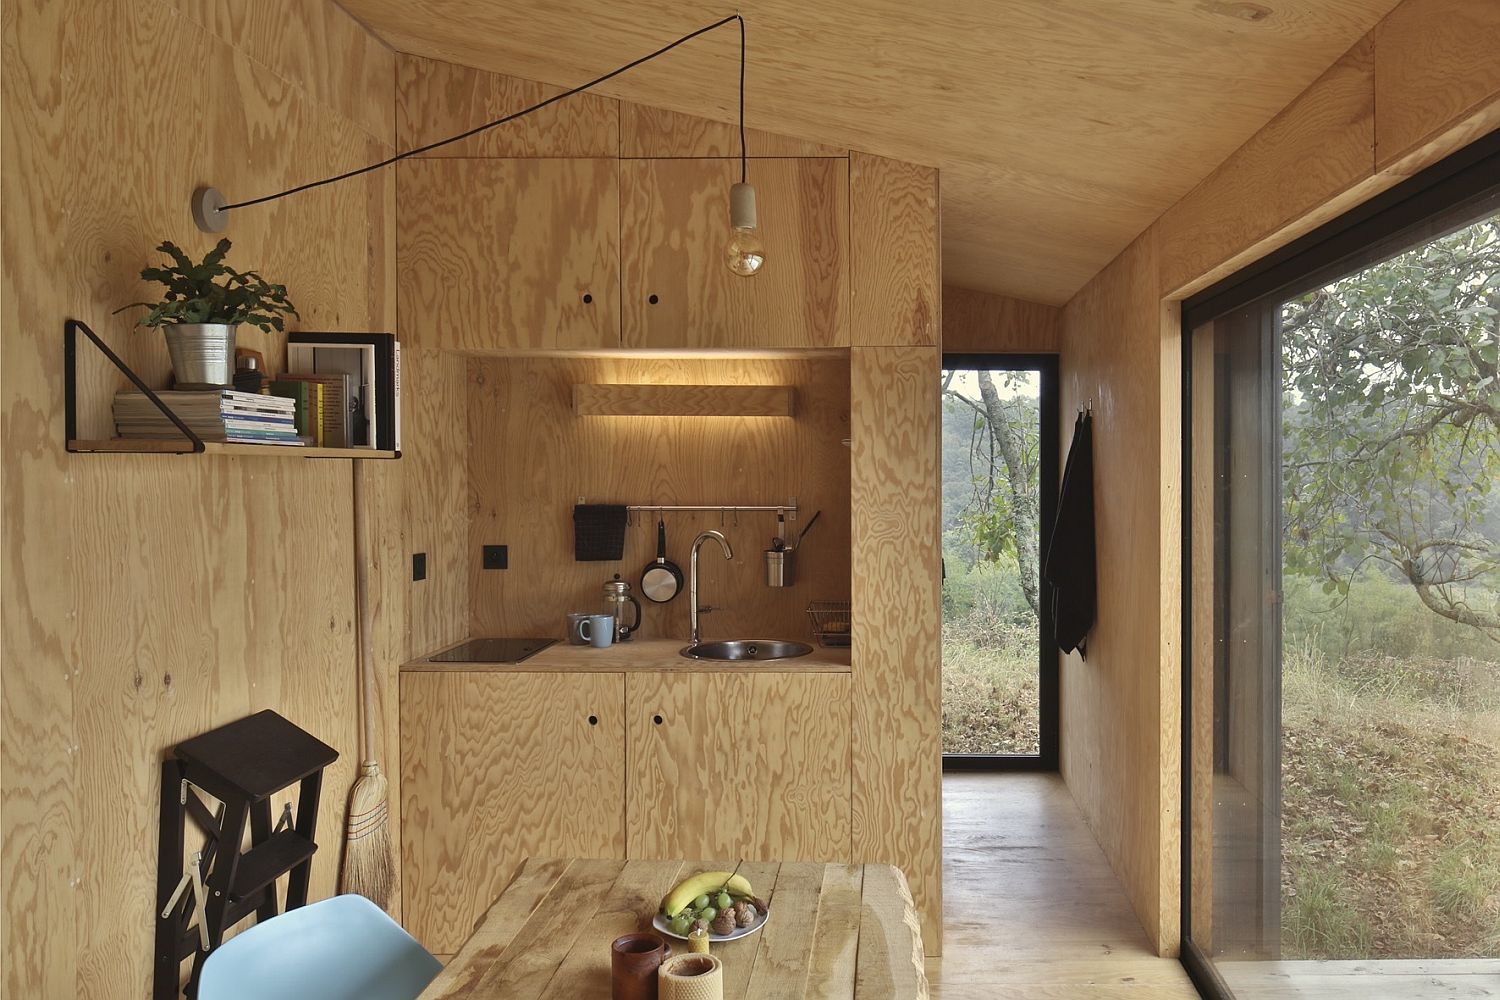 Lighter tones of wood shape the interior of the cabin